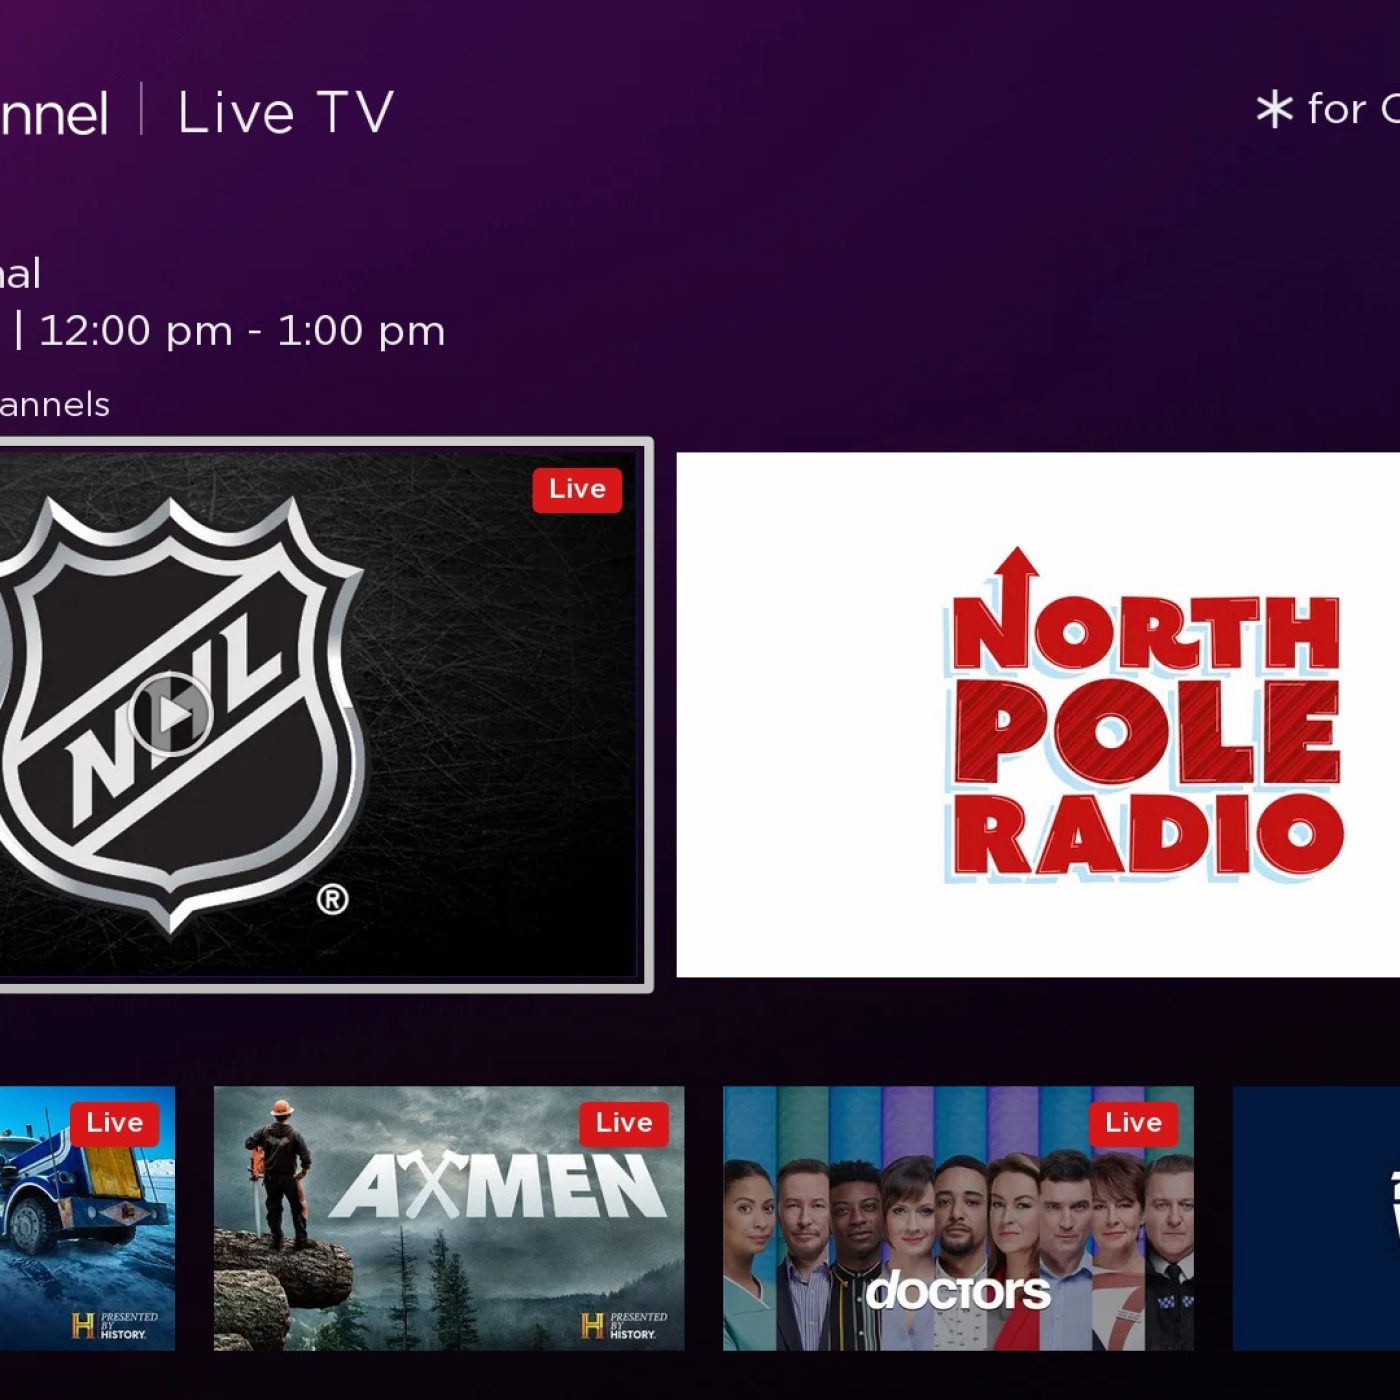 New linear channels now streaming for free on The Roku Channel